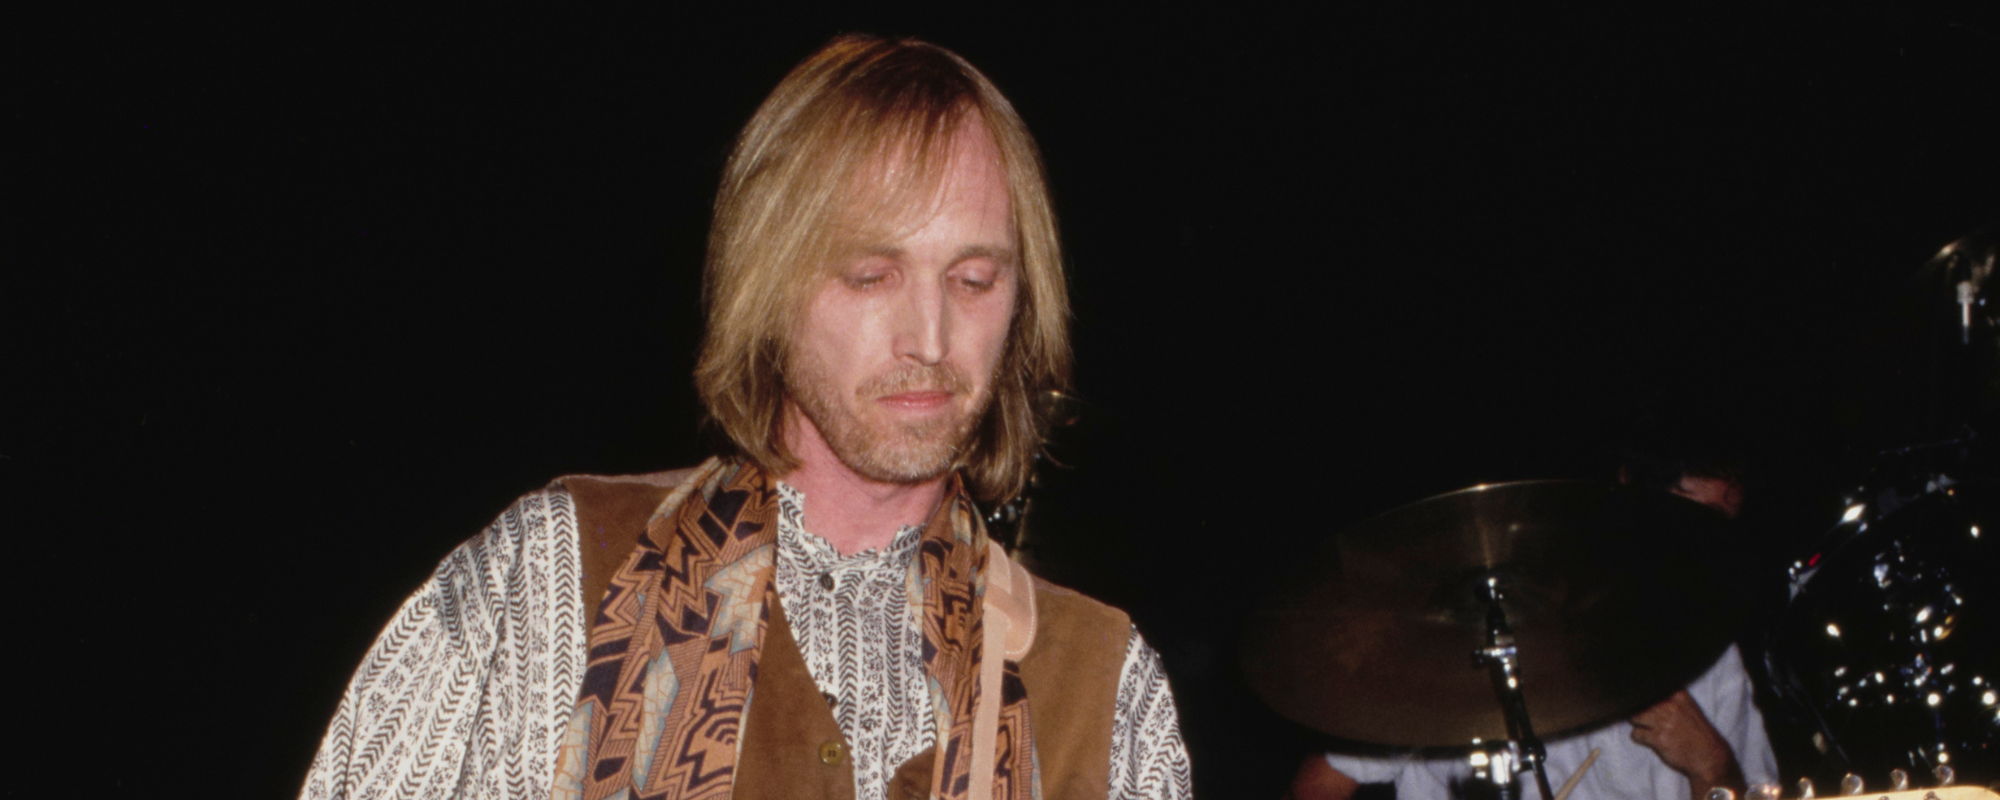 3 of Tom Petty’s Greatest Songs of All Time